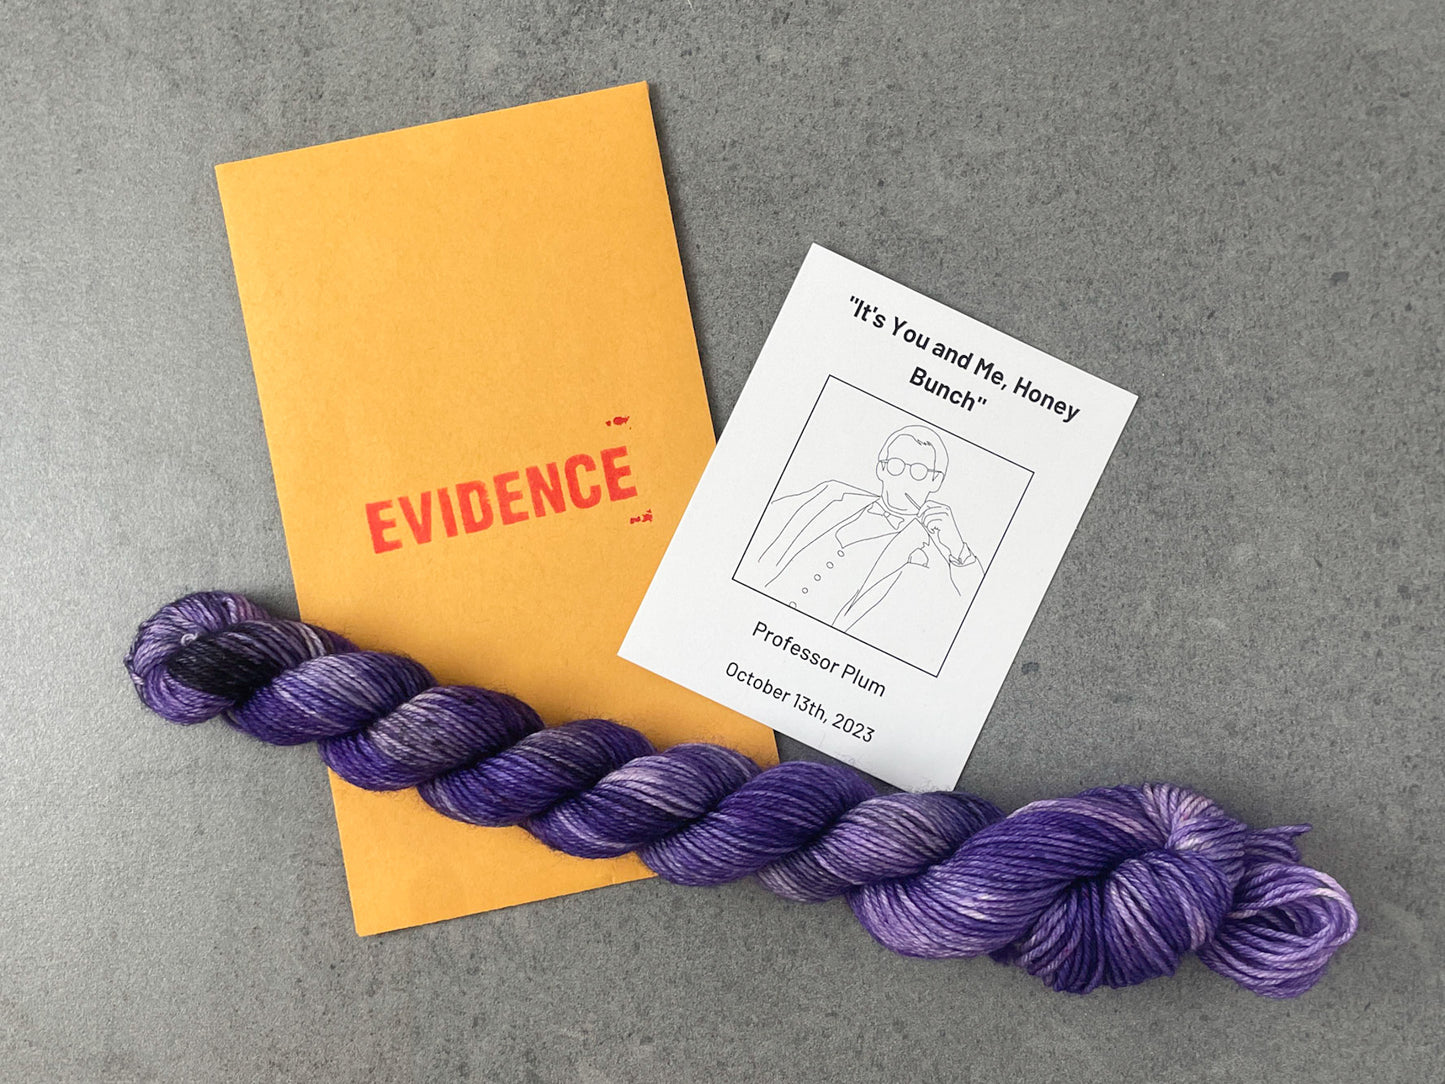 A skein of deep purple yarn on top of an envelope stamped with "Evidence" and a card with a drawing of Professor Plum on it.